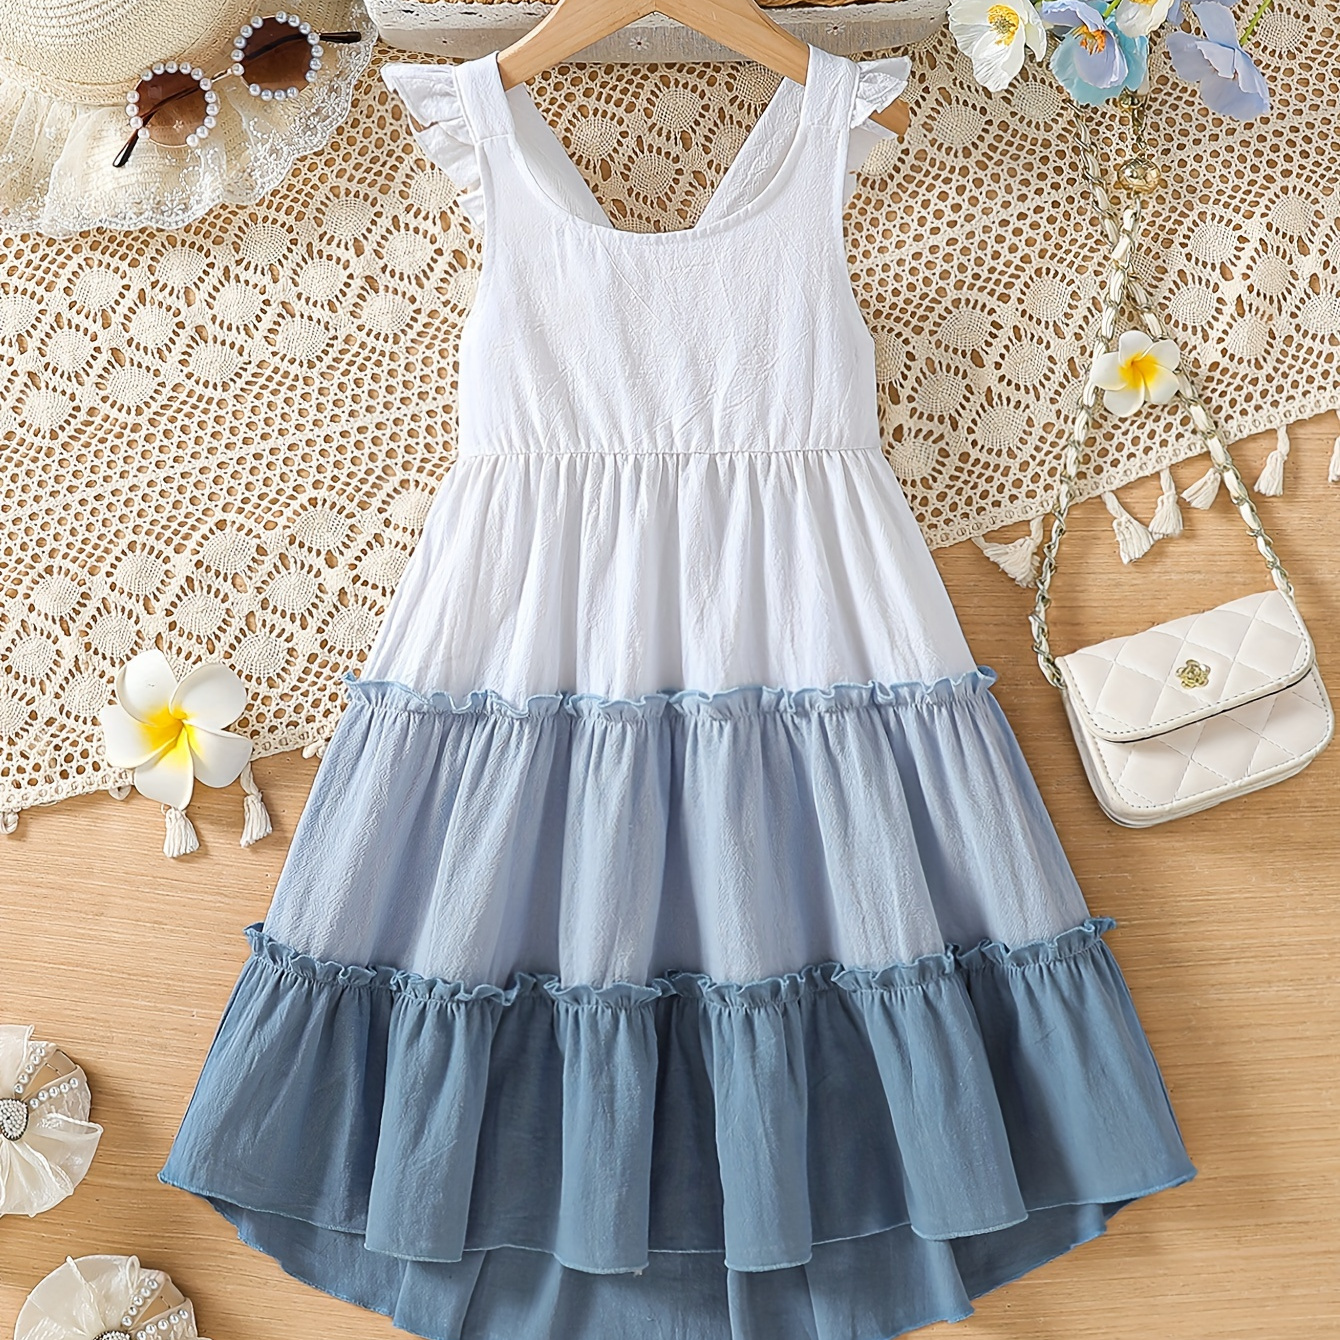 

100% Cotton, Casual Color Matching Ruffle Trim Sleeveless Dress For Girls Summer Holiday Party Gift